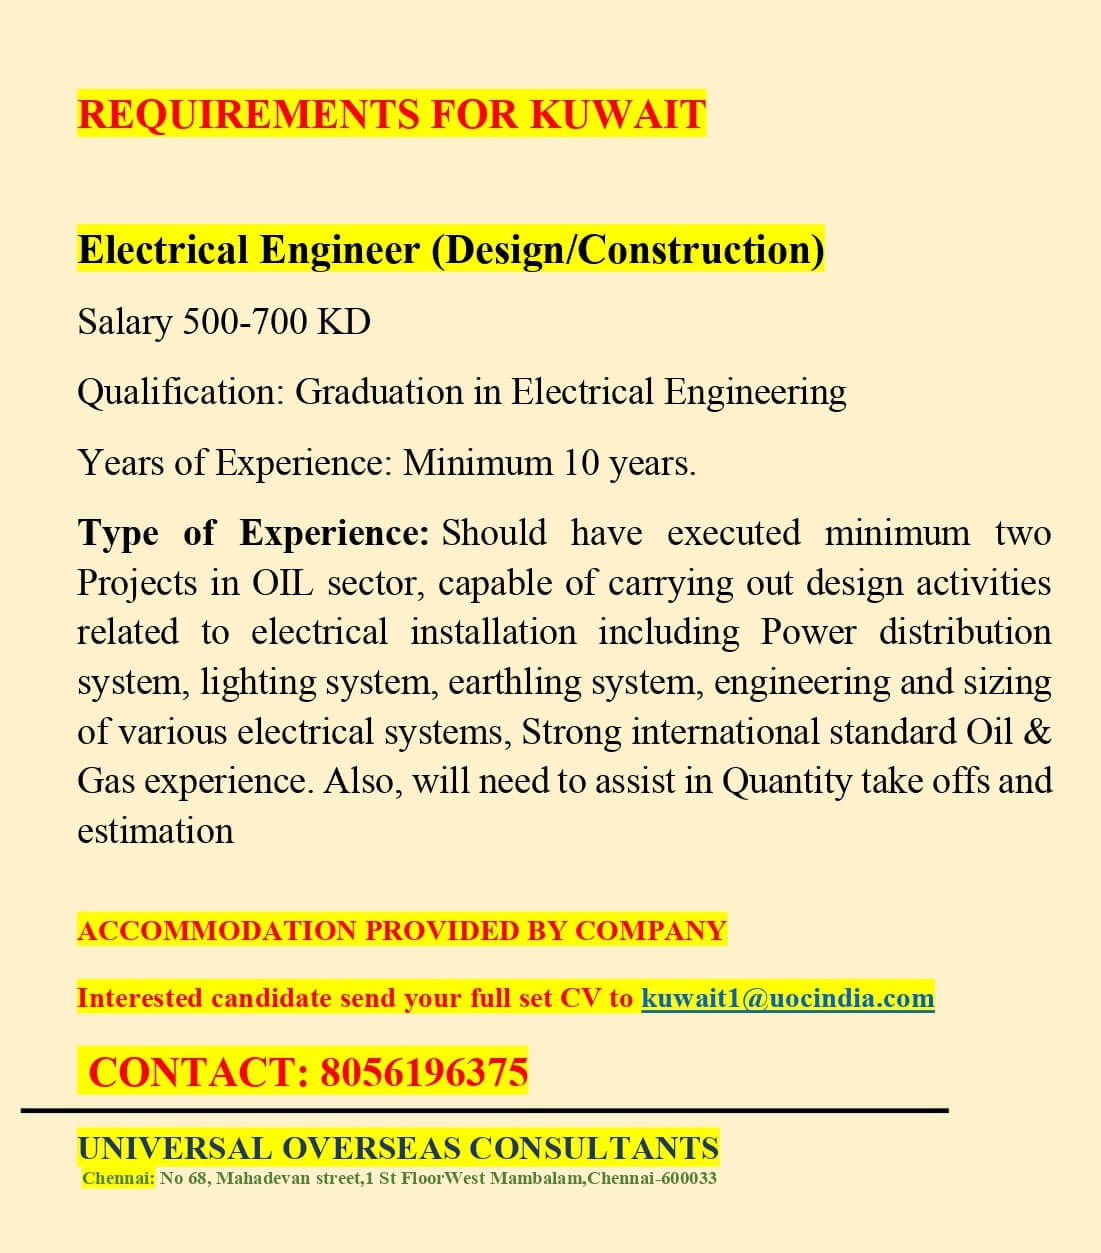 Requirements for Kuwait